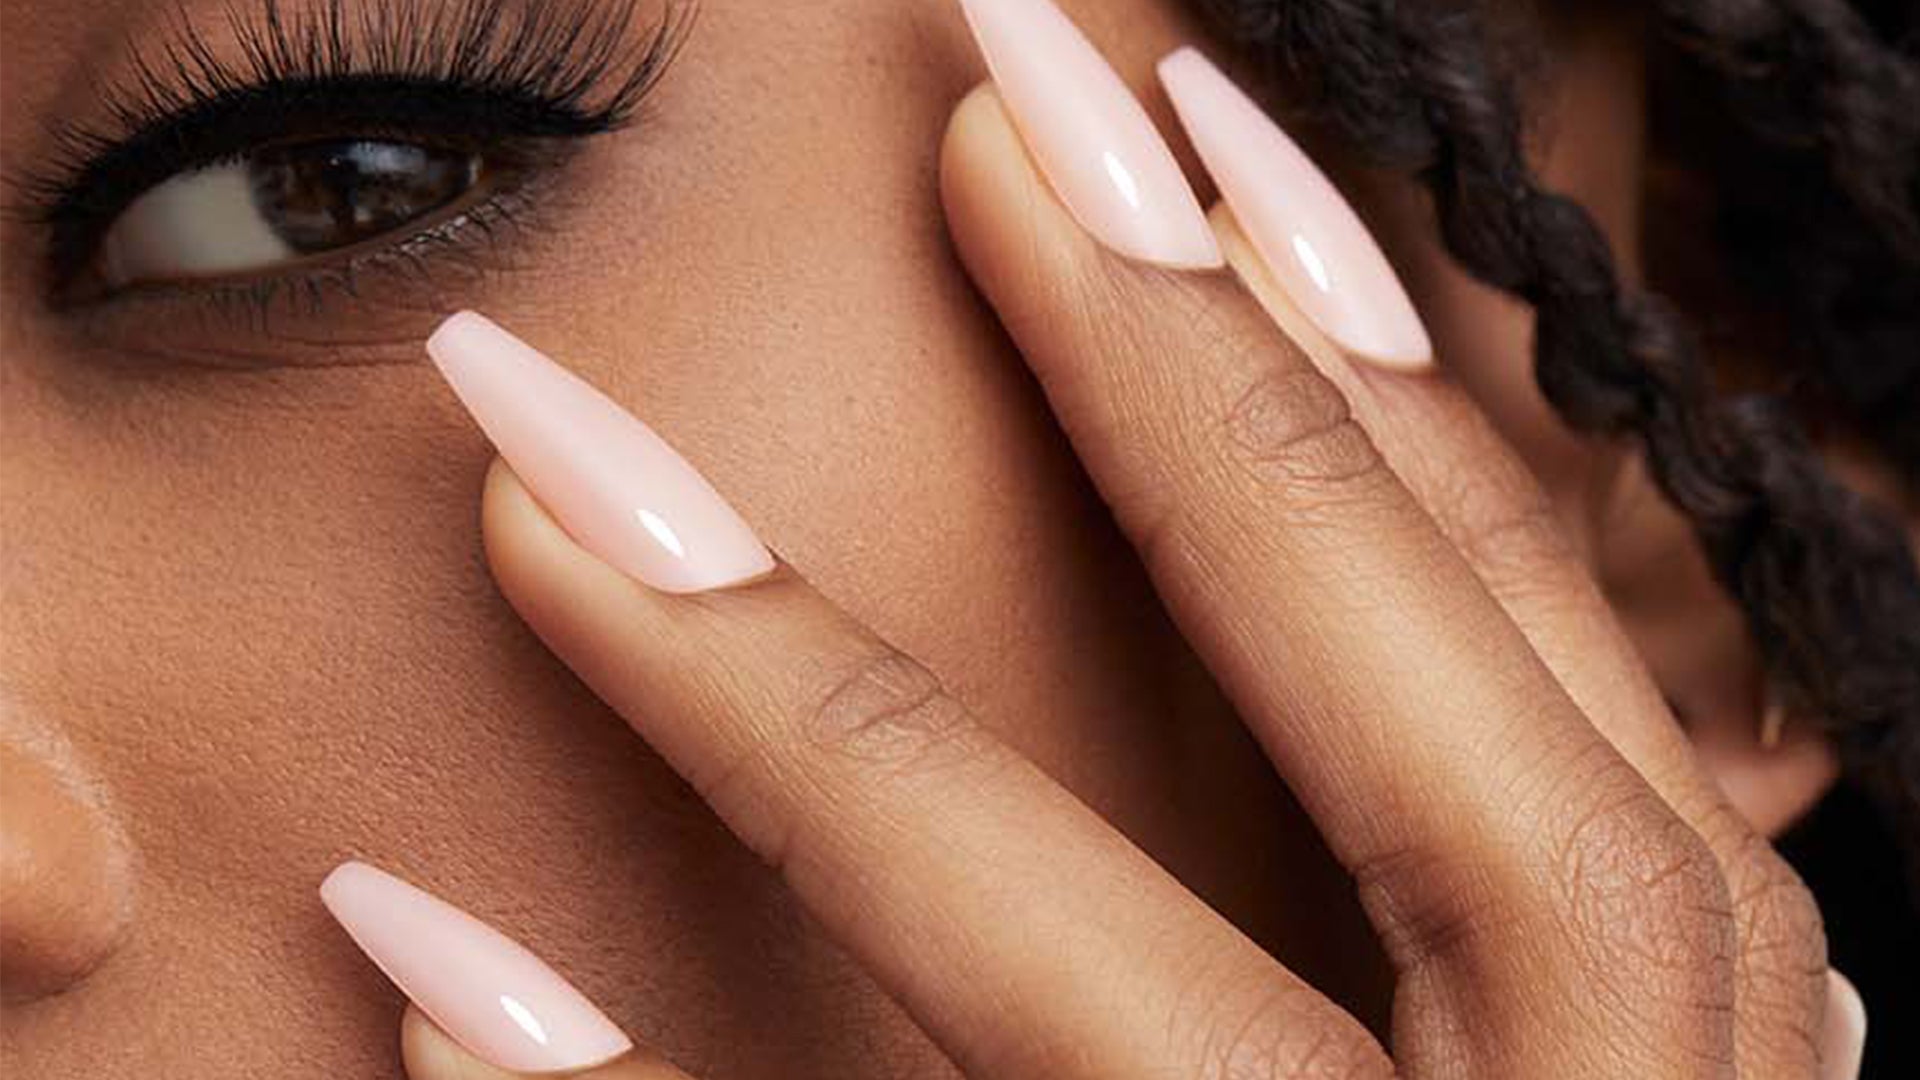 Press-On Nails, You Need ASAP